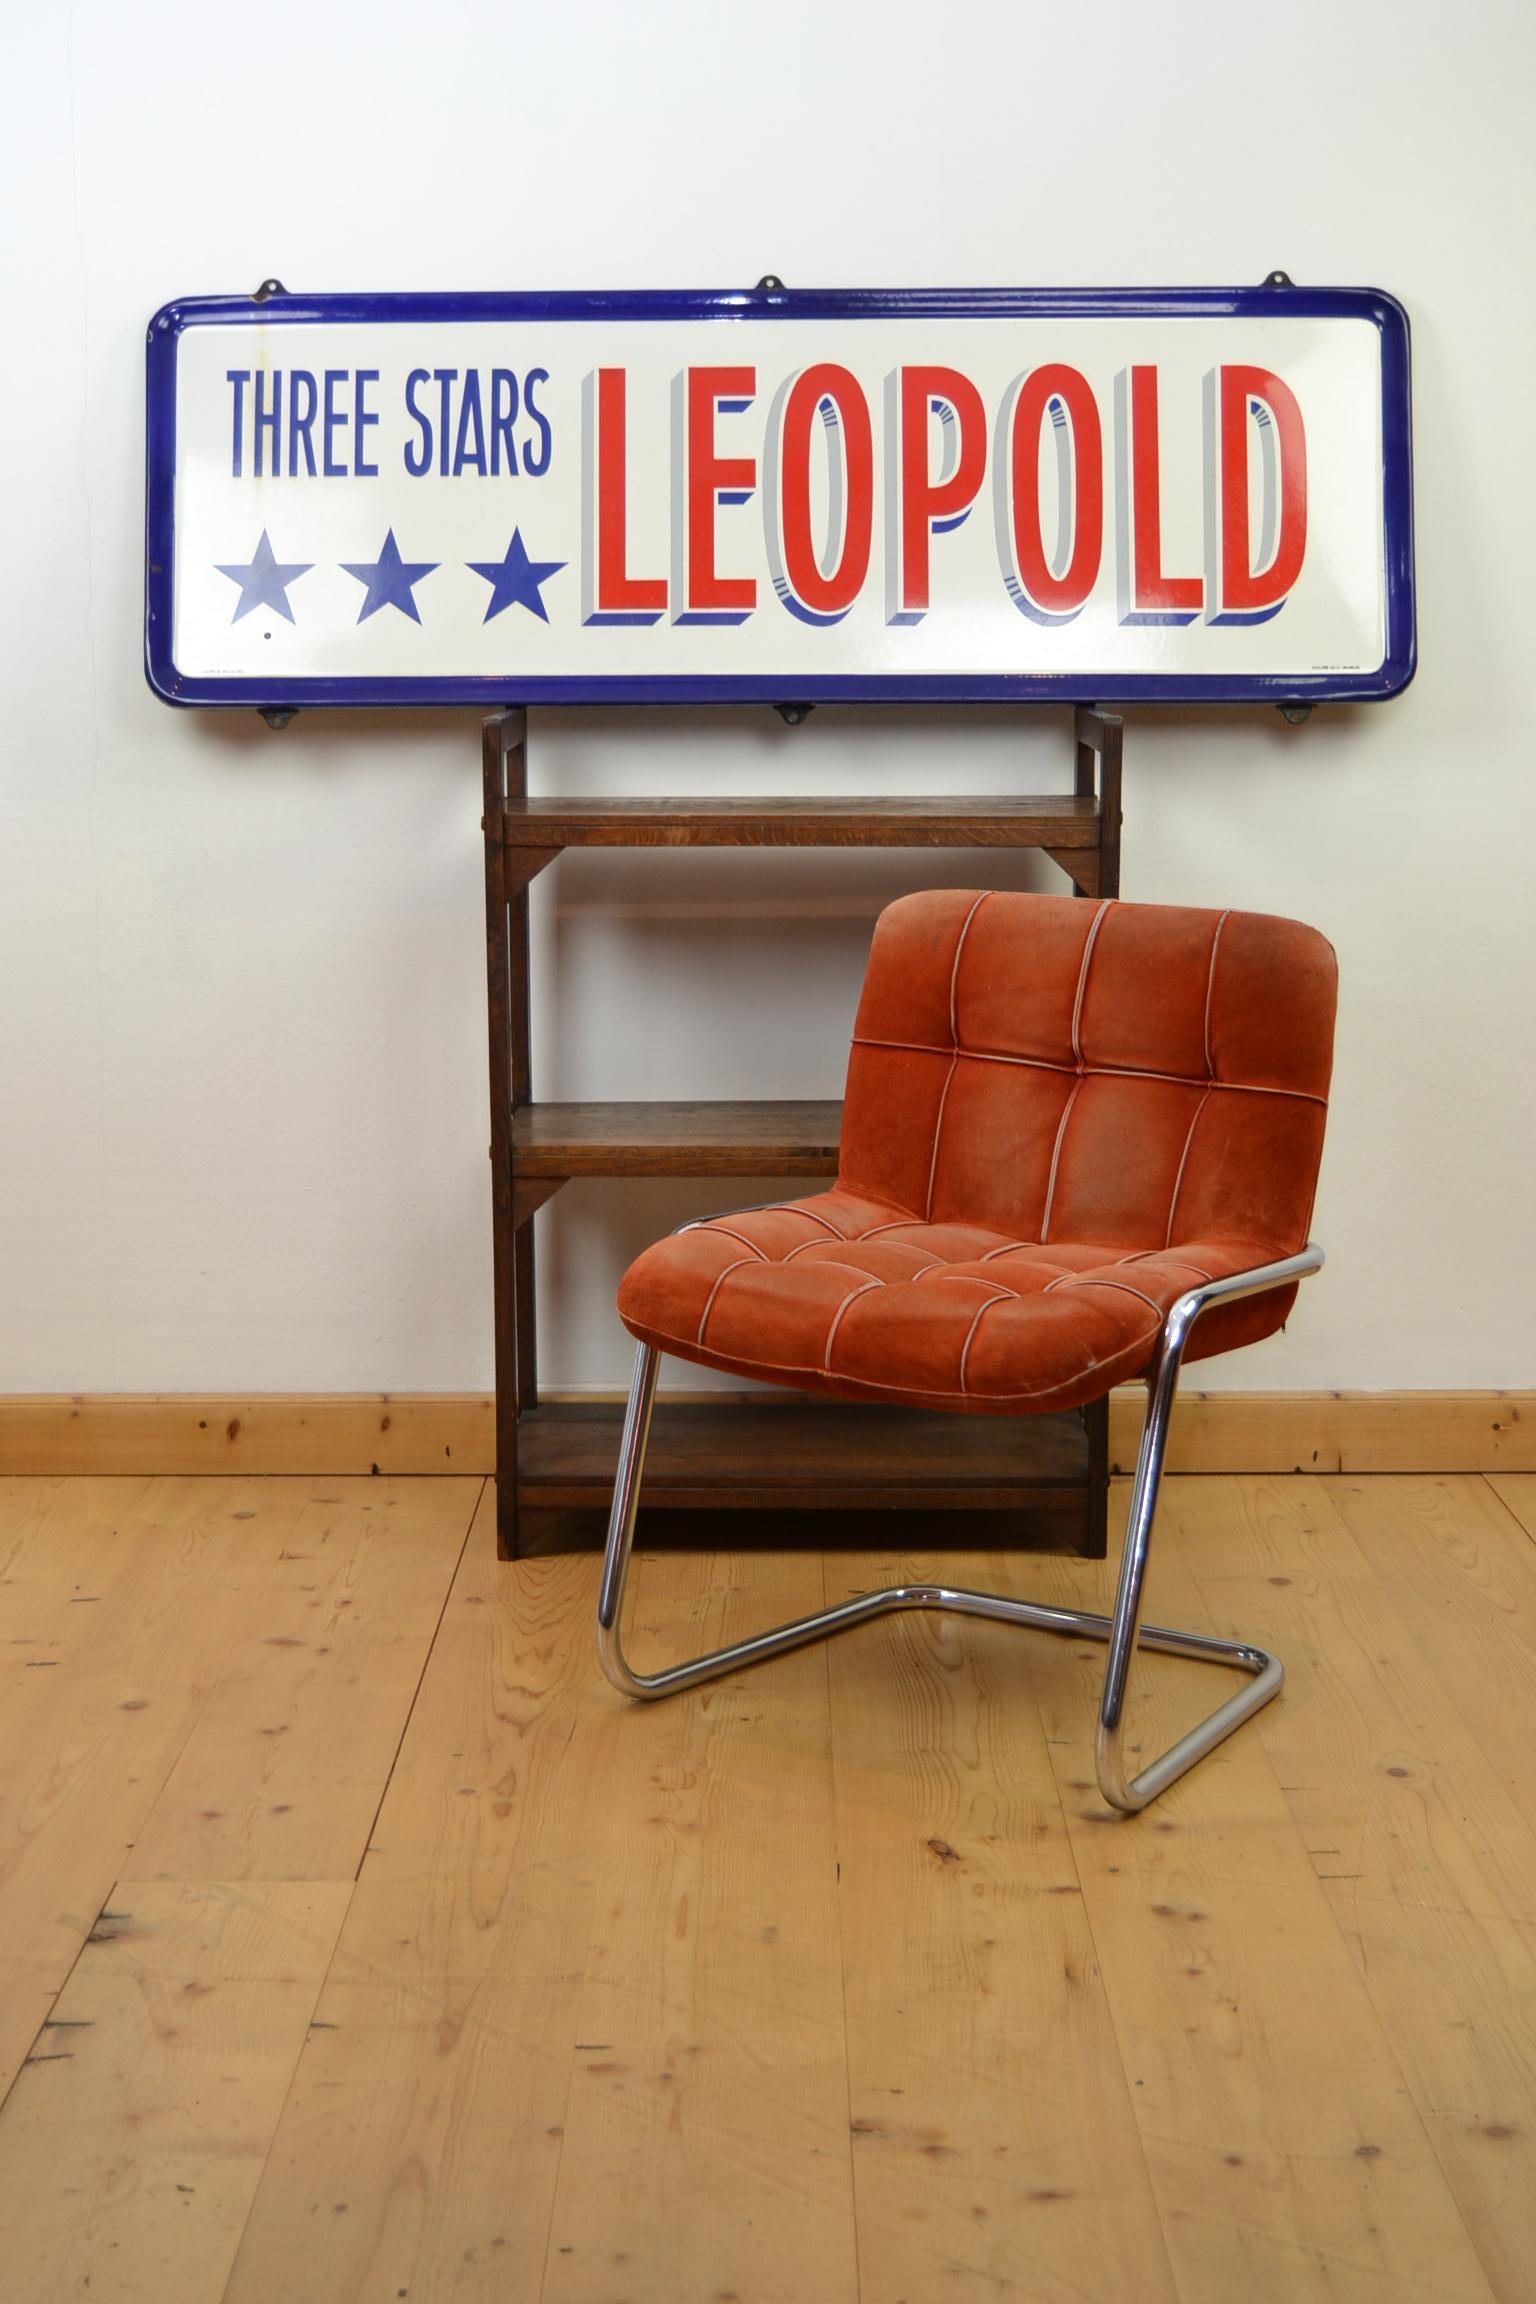 Porcelain Beer Sign for Belgian Beer - Three Stars Leopold Sign 
A large and great looking Belgian beer sign with the American colors white, red and blue and 3 stars.
This Enamel sign was made for the Brewery Leopold Brussels, which was located in